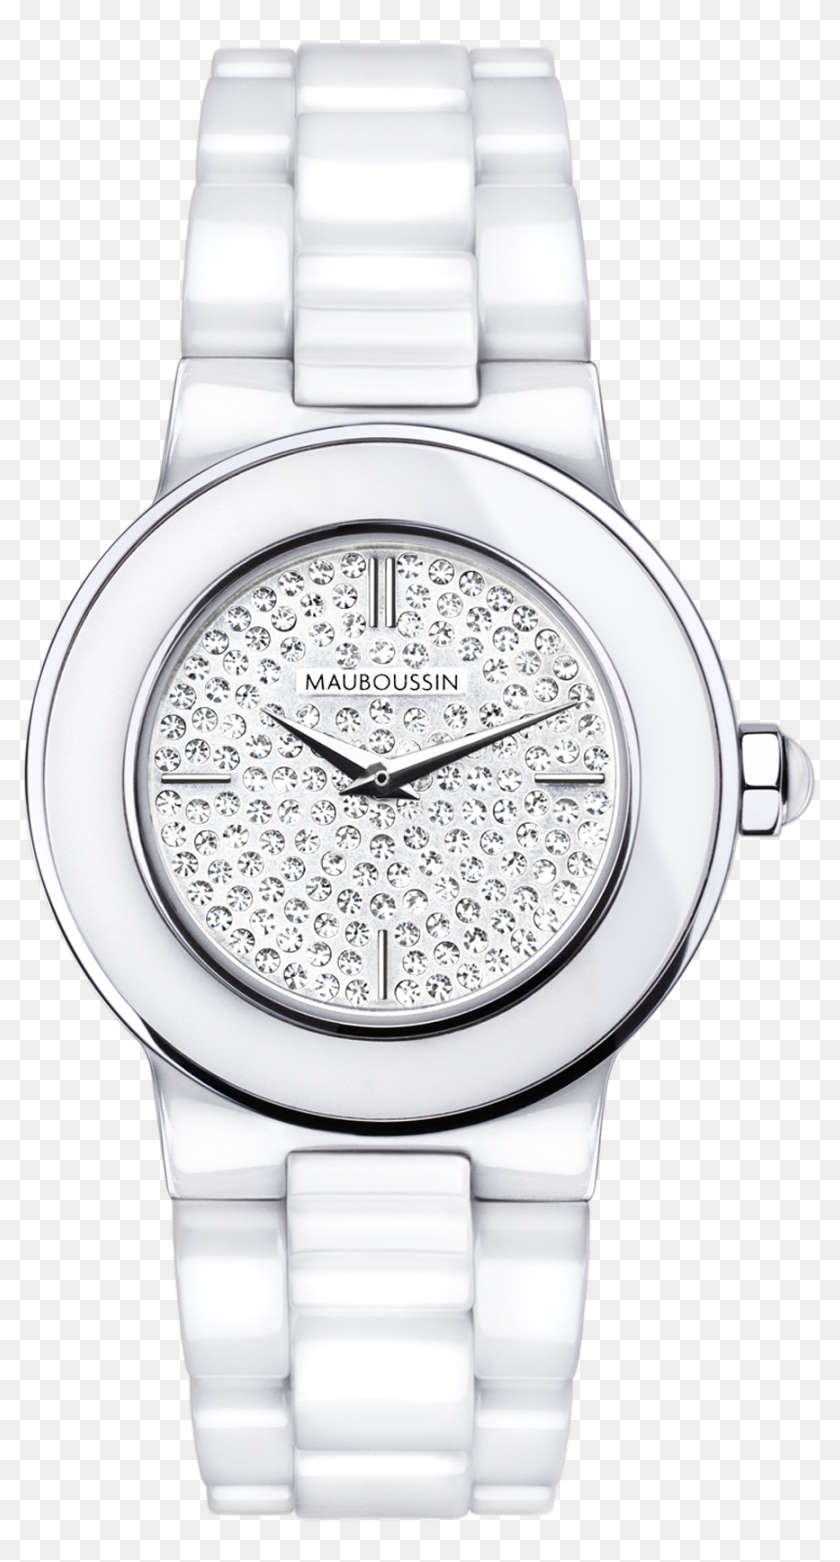 Amour, Le Jour Watch, White Ceramic And Fully Diamond - Montre ...